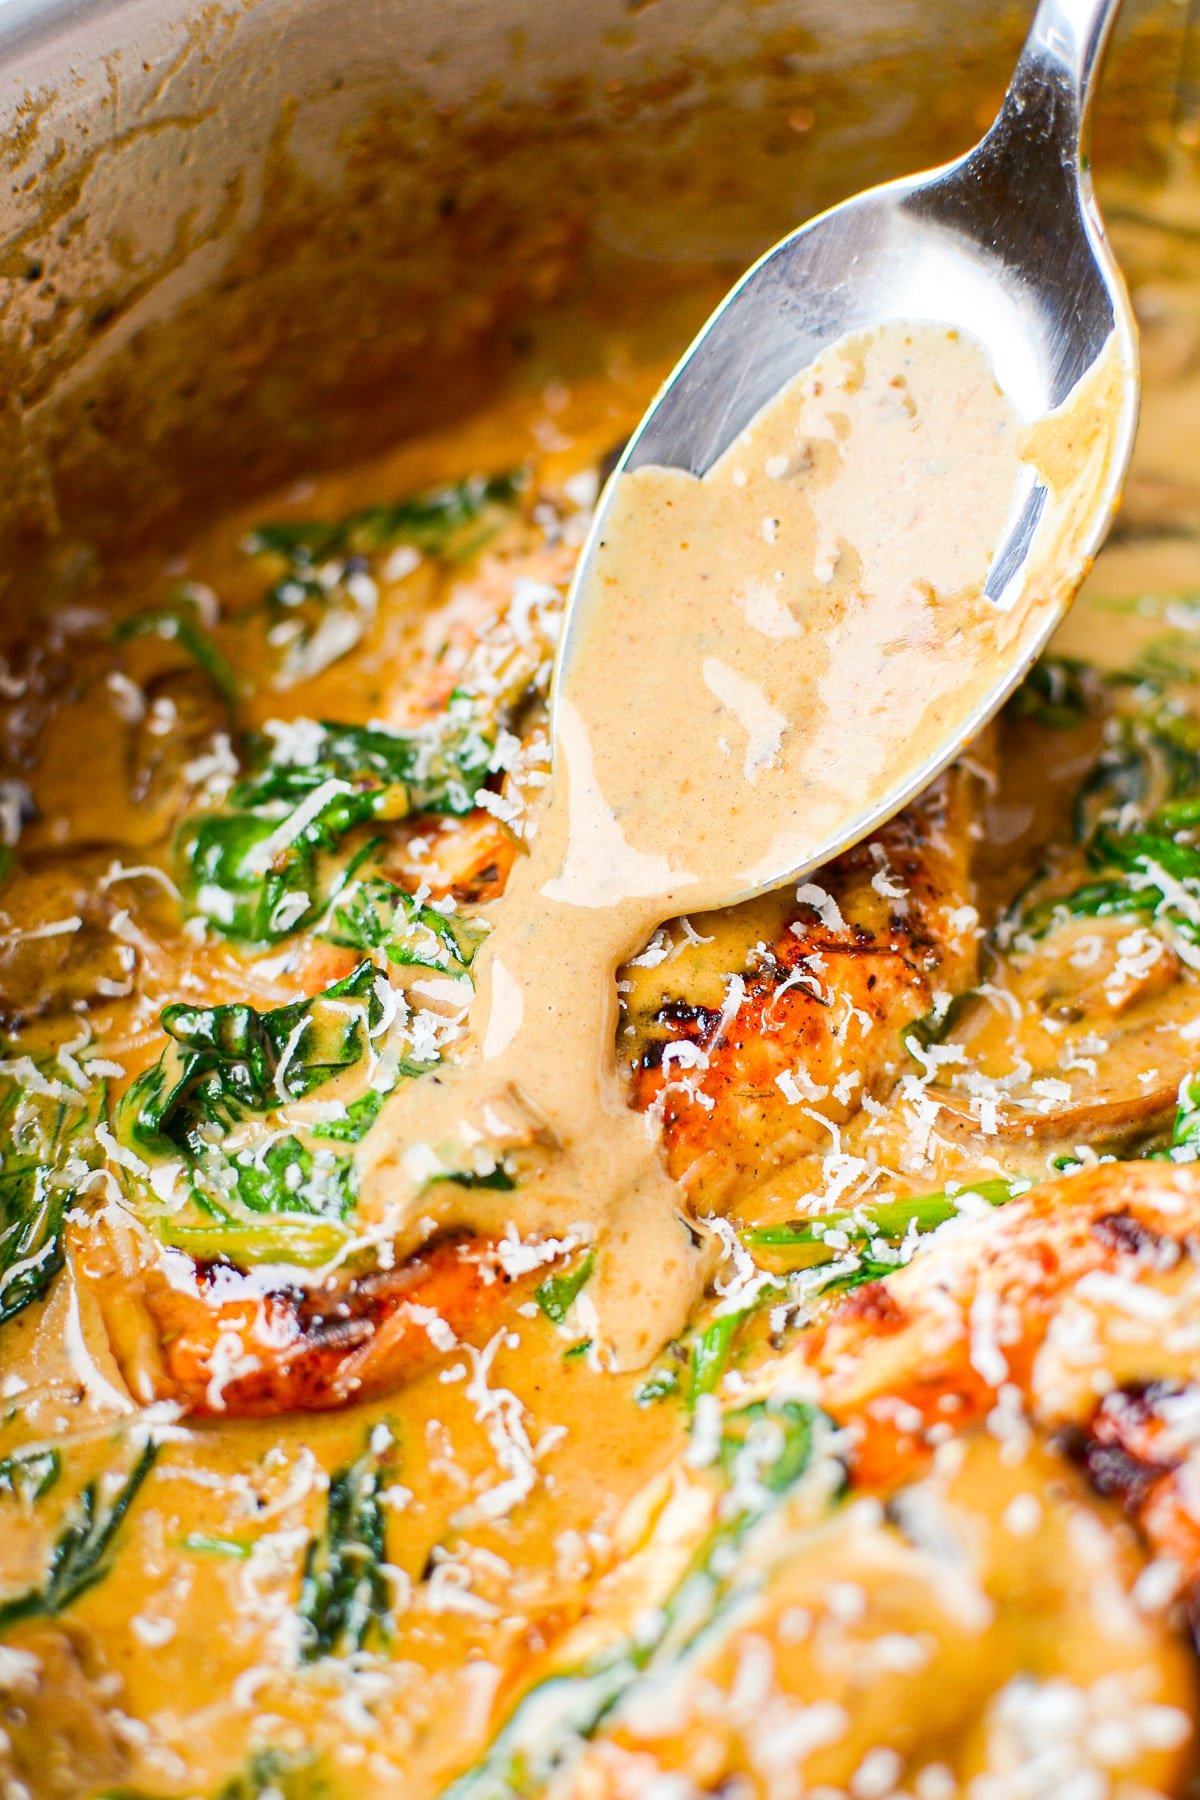 Spooning creamy sauce over a chicken breast.